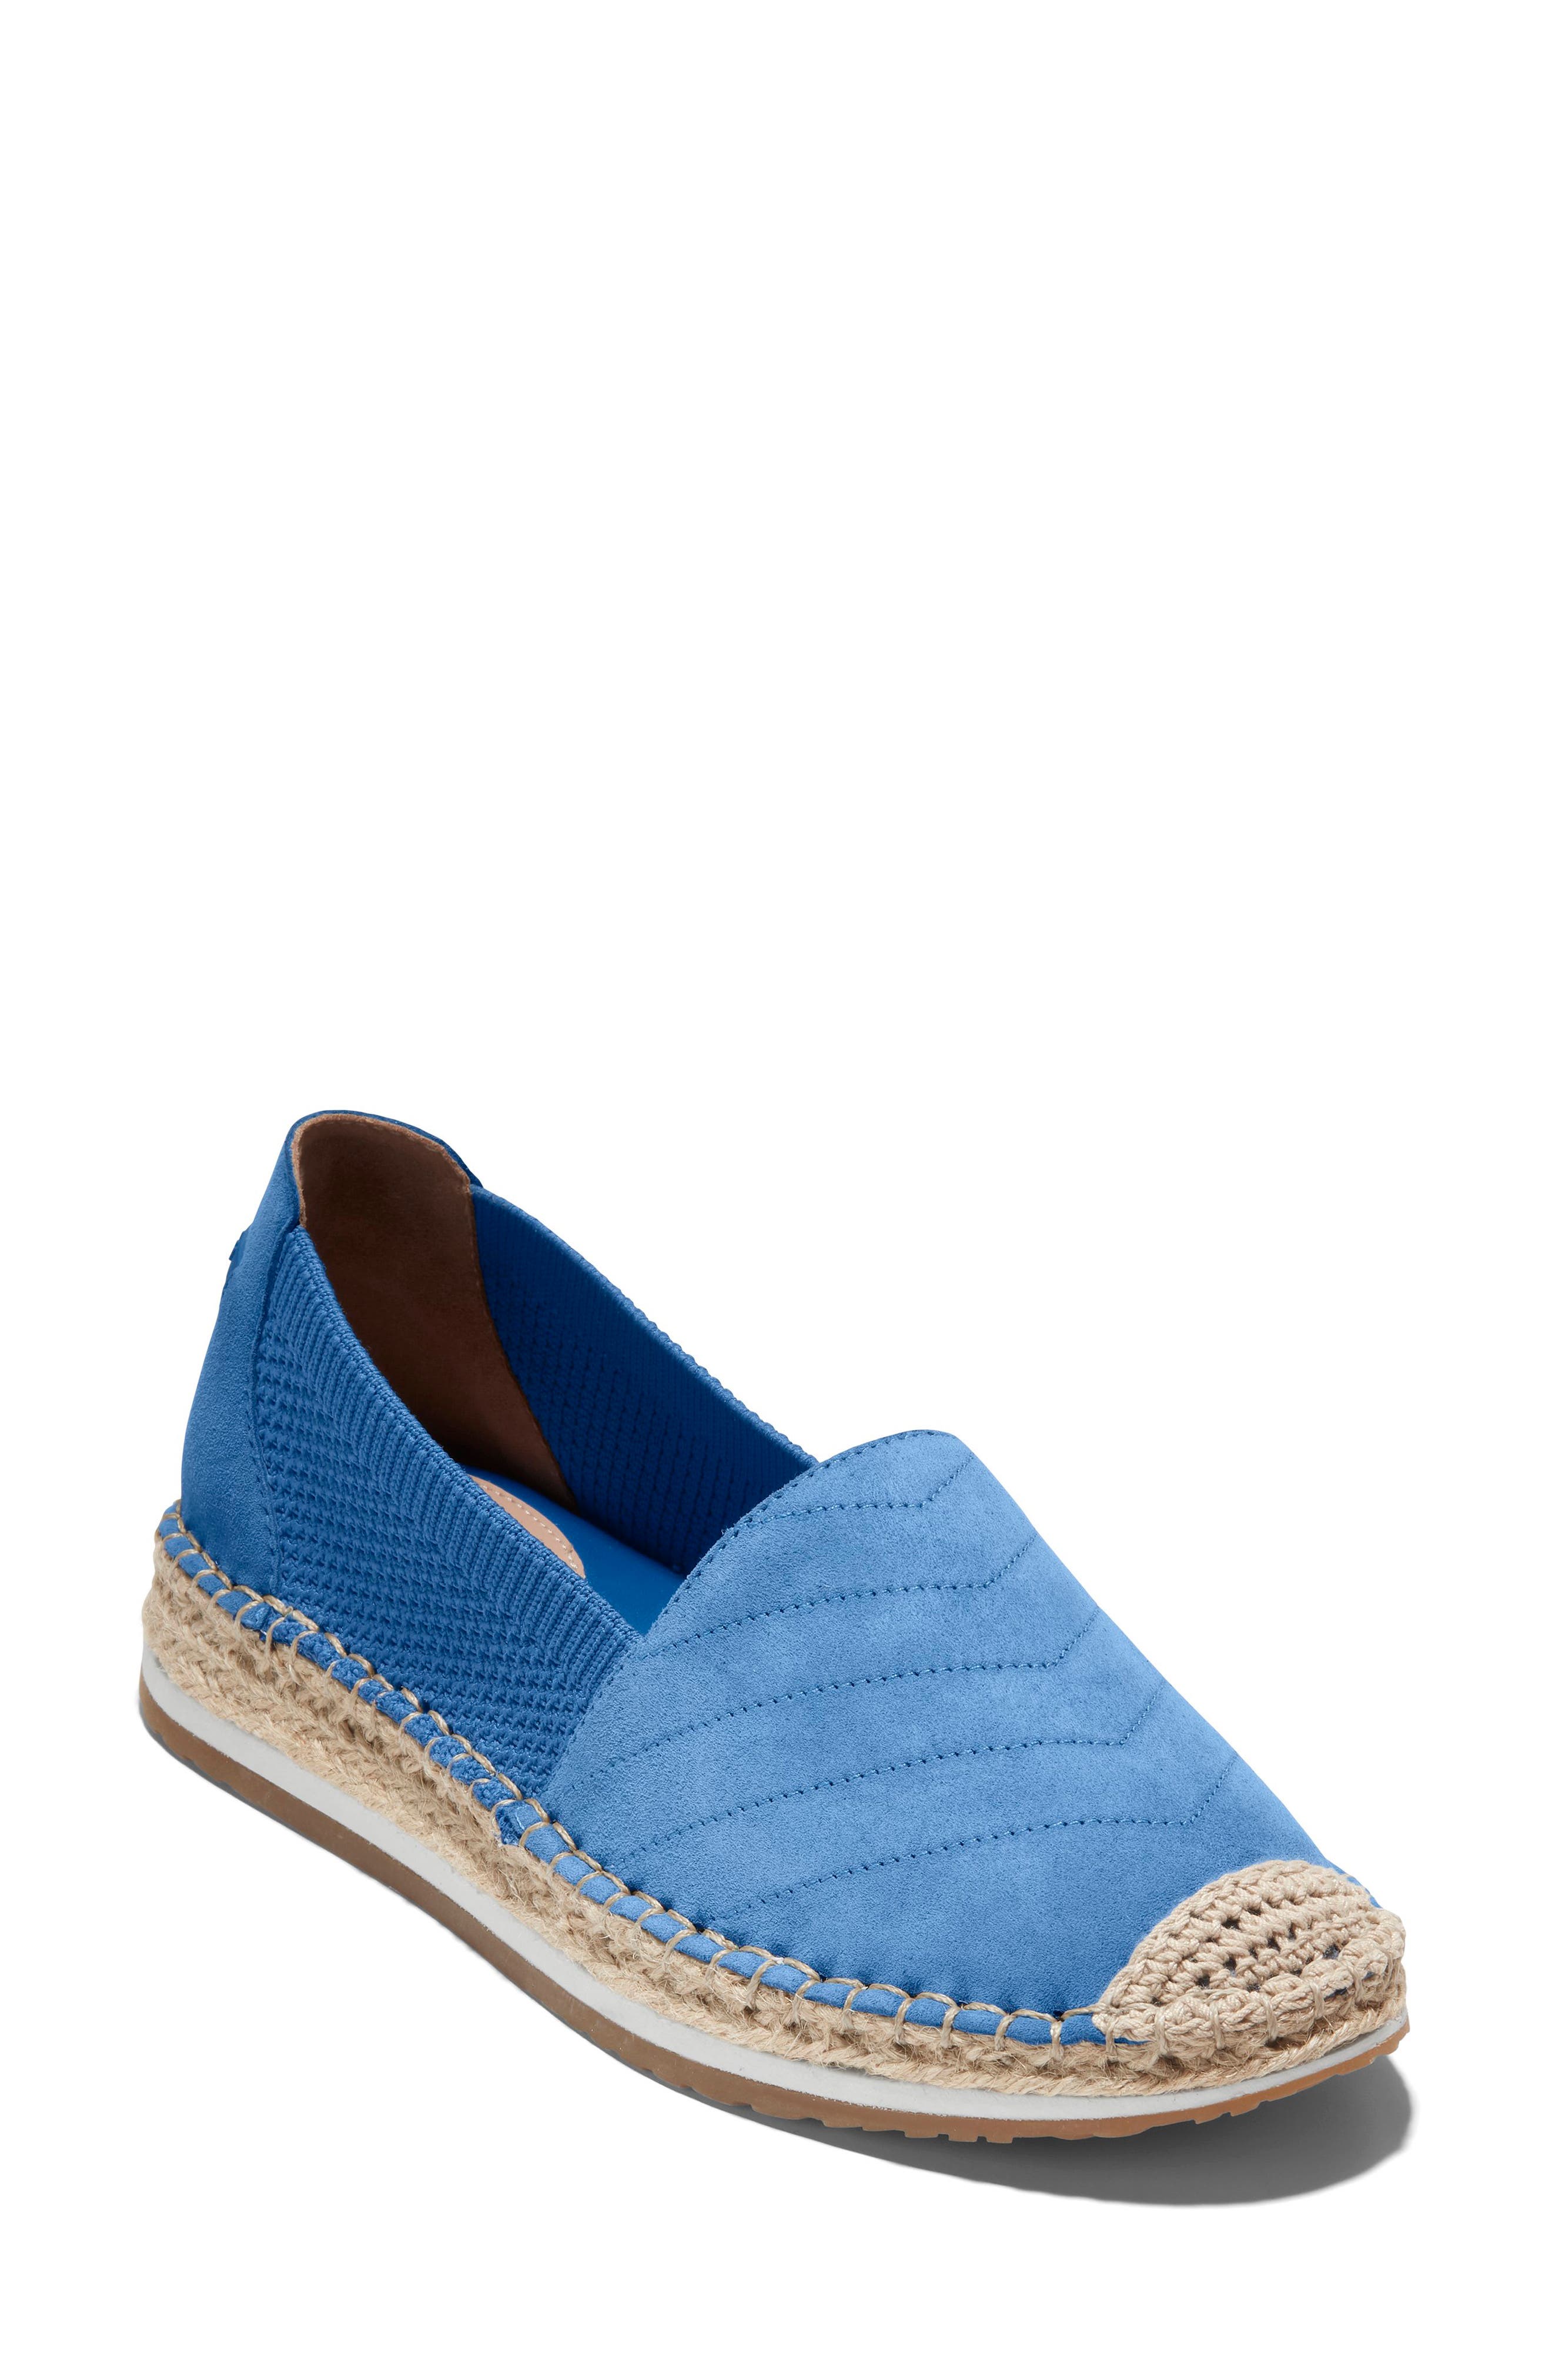 Guess Leather Espadrilles in Pastel Blue Blue Womens Shoes Flats and flat shoes Espadrille shoes and sandals 